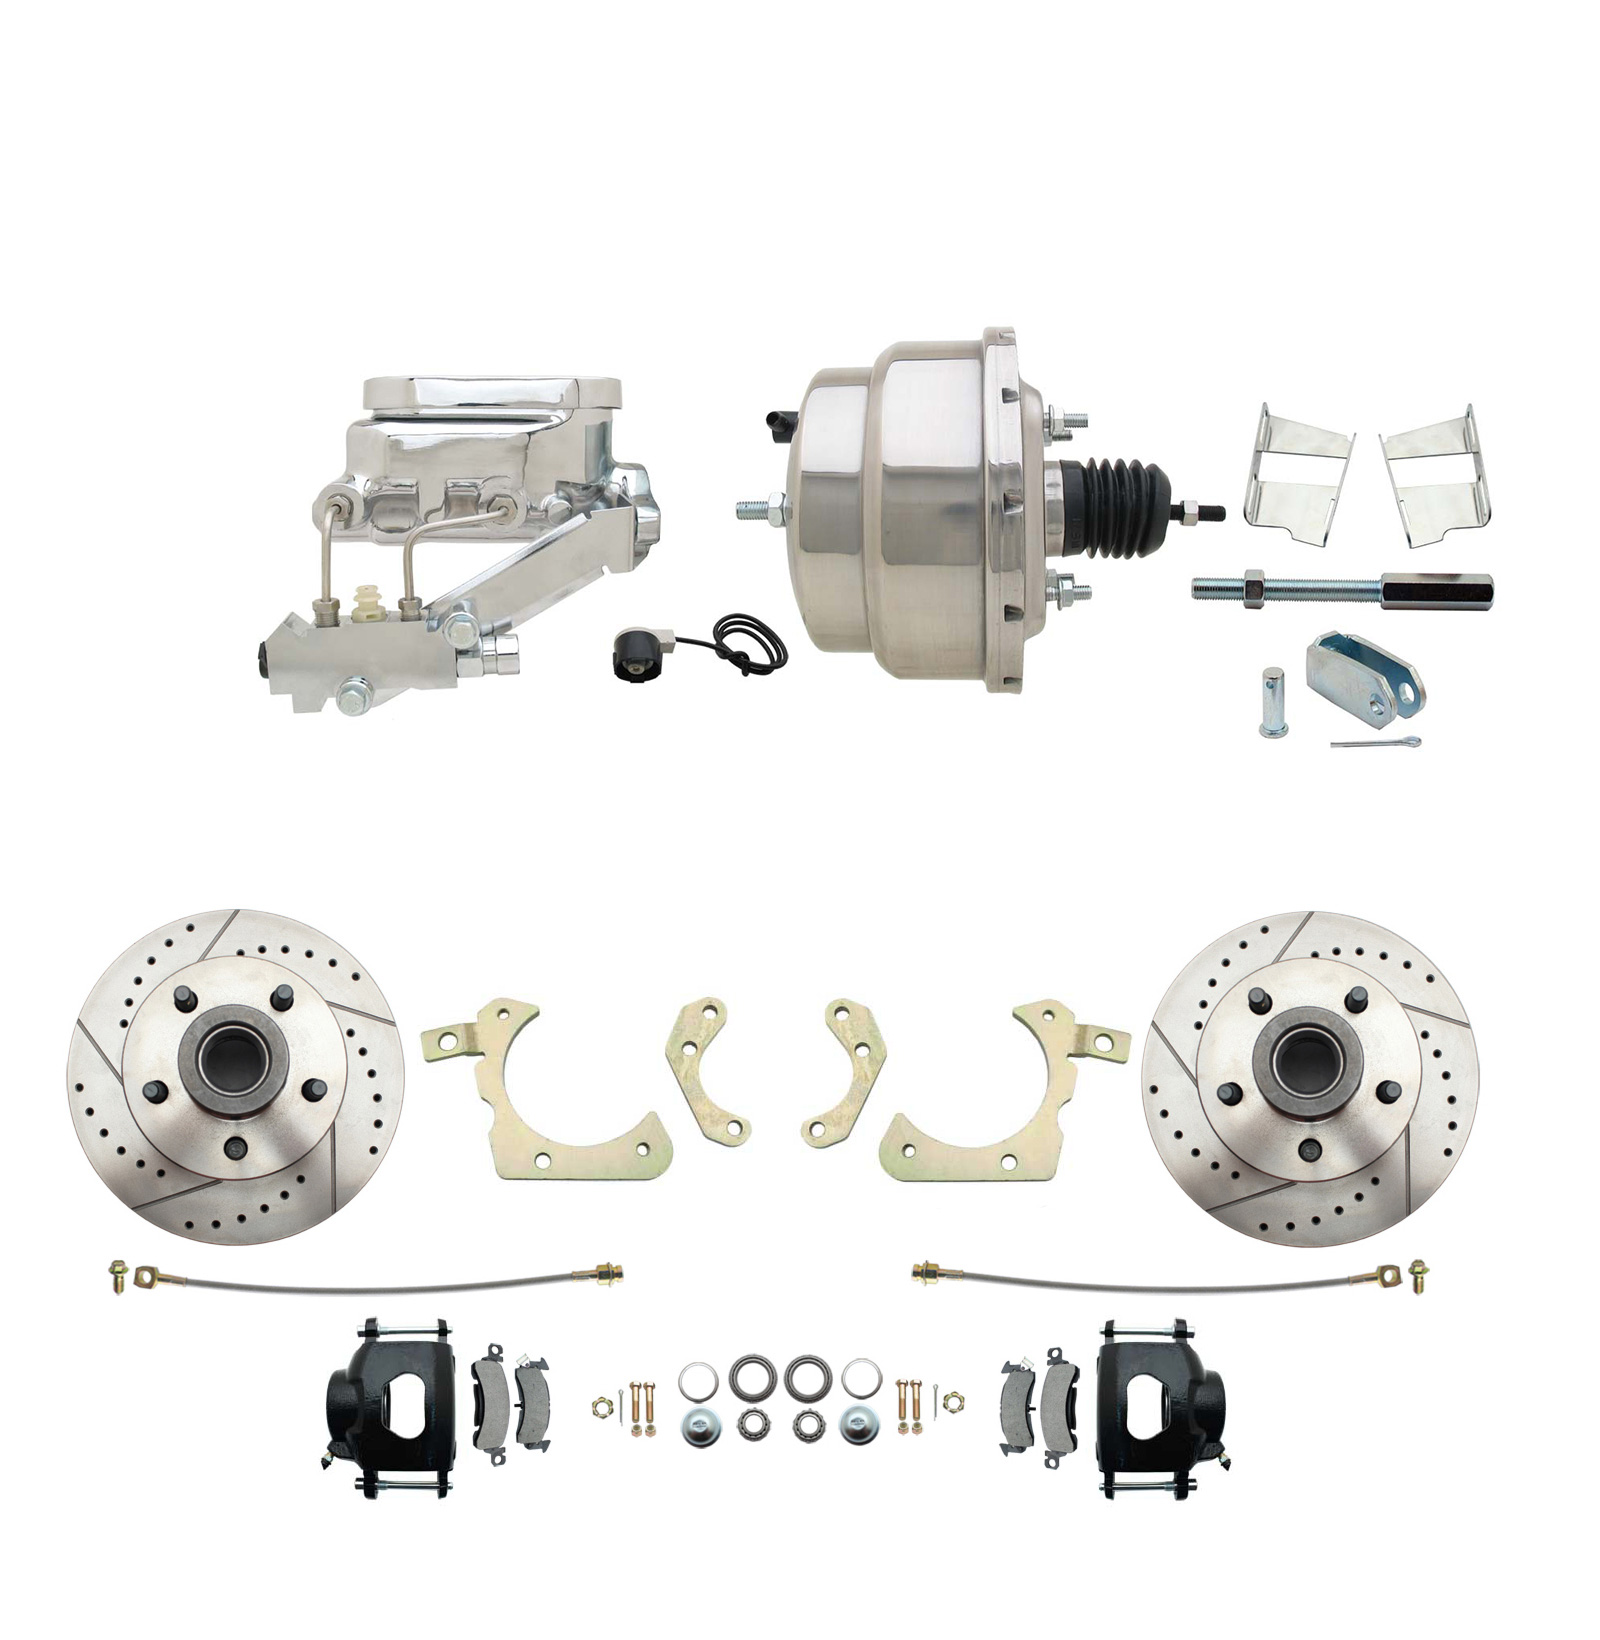 1959-1964 GM Full Size Front Disc Brake Kit Black Powder Coated Calipers Drilled/Slotted Rotors (Impala, Bel Air, Biscayne) & 8 Dual Stainless Steel Booster Conversion Kit W/ Chrome Flat Top Master Cylinder Left Mount Disc/ D